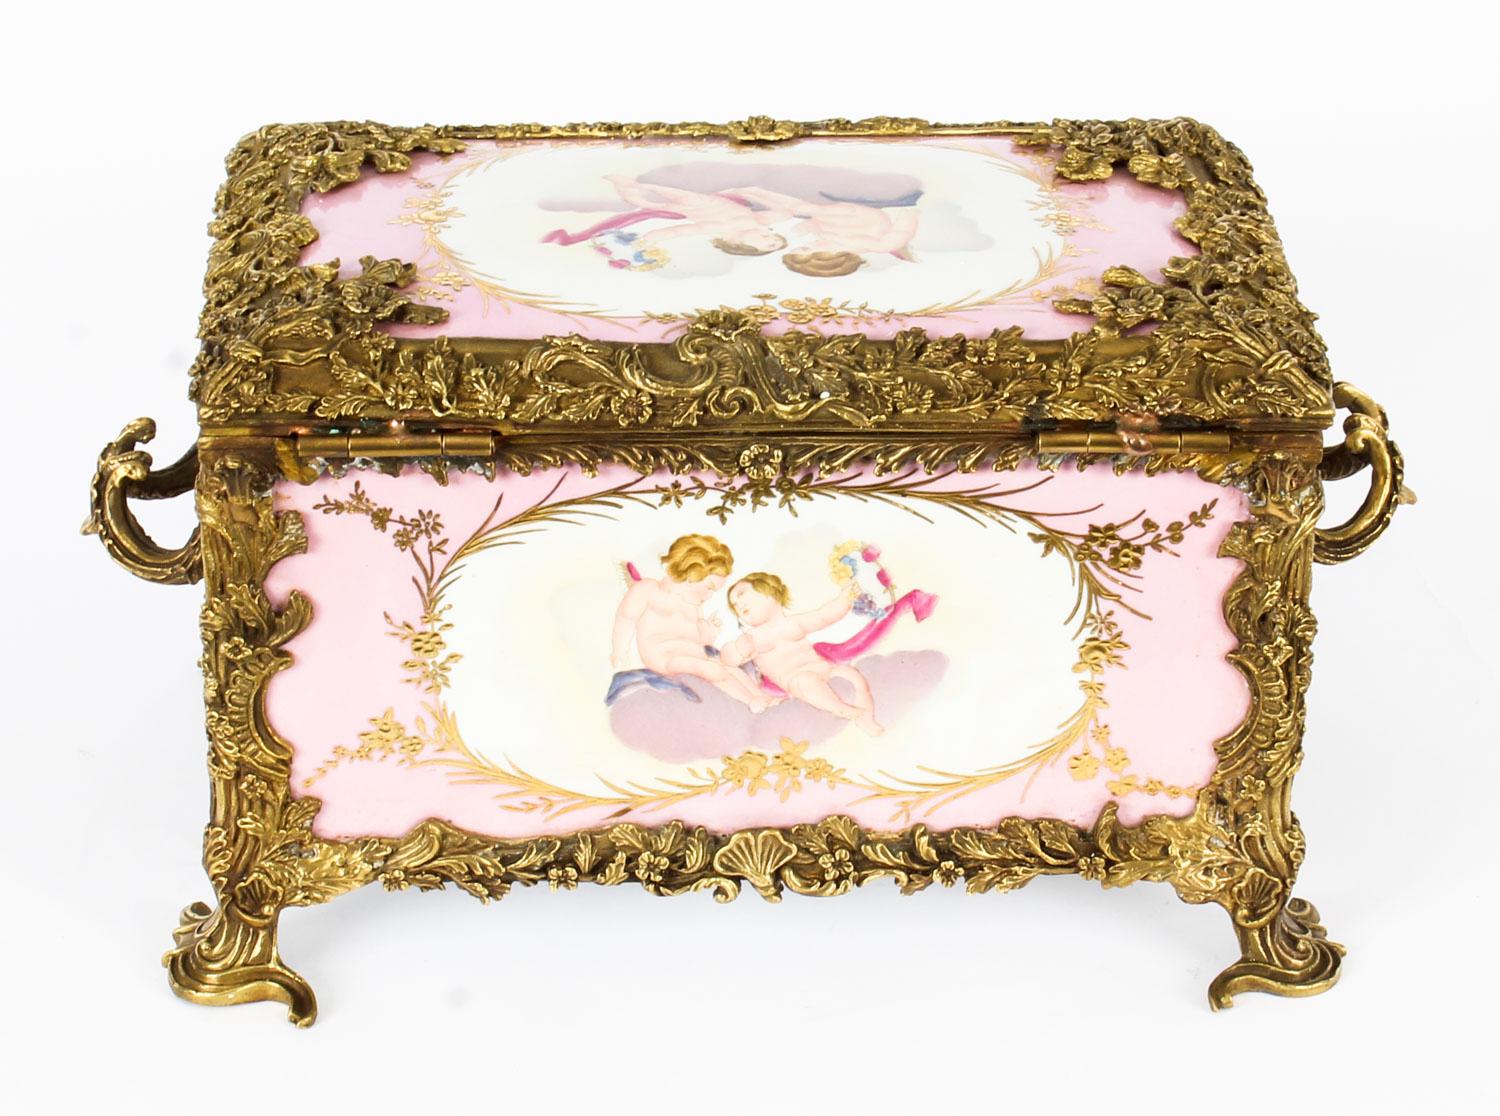 This is a beautiful large vintage Russian Revival porcelain and ormolu mounted jewellery casket in rose pink, dating from the last quarter of the 20th century.

This highly decorative piece is hand painted with cherubs and musical instruments, has